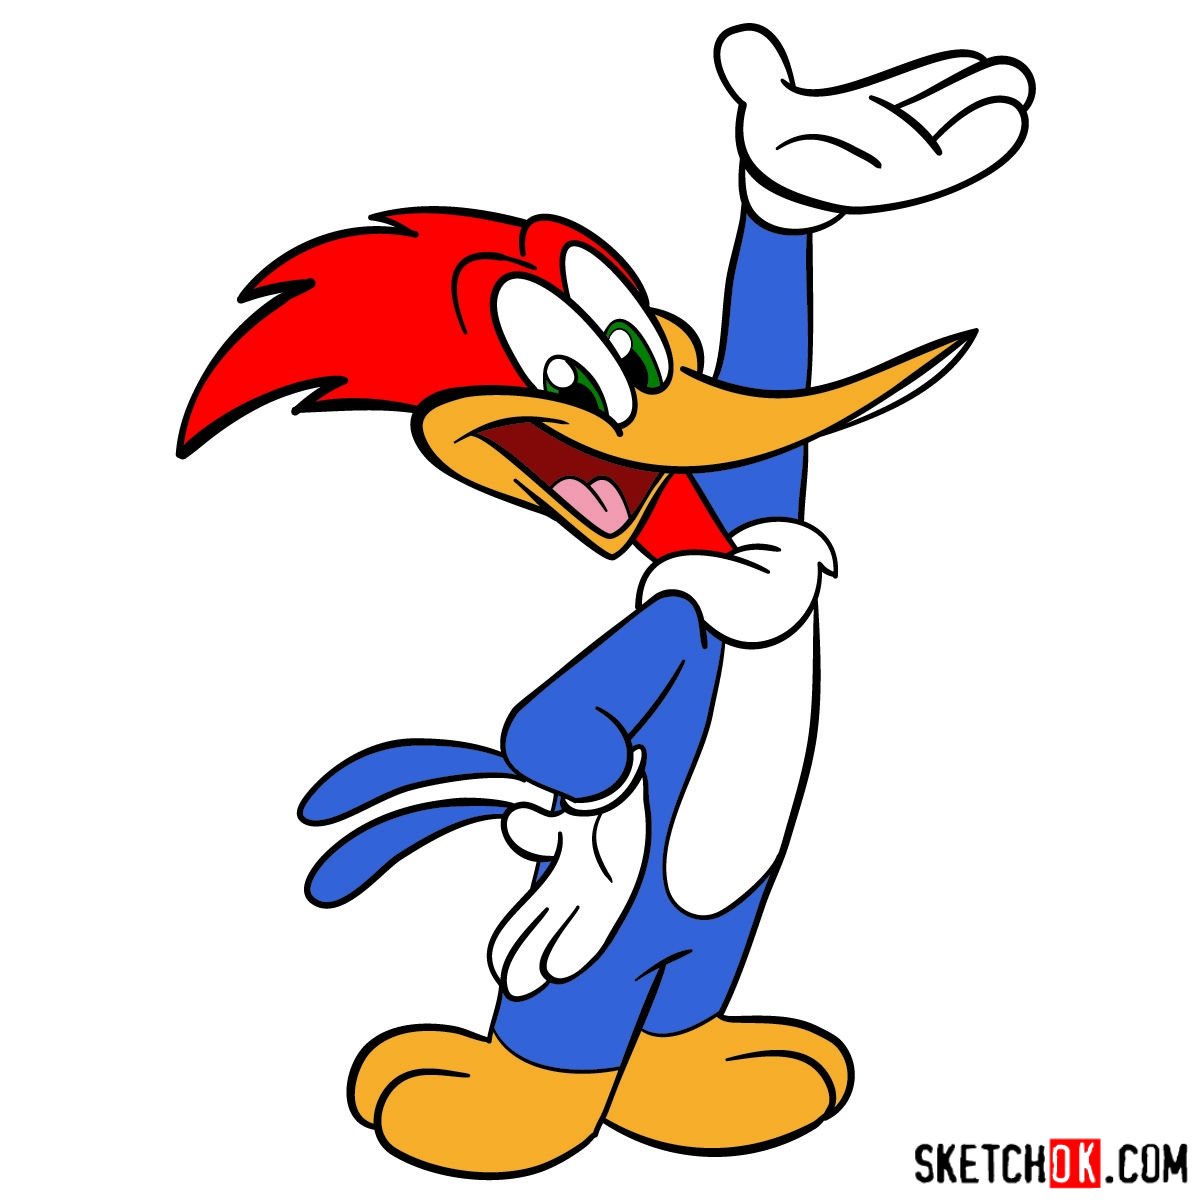 How to draw Woody Woodpecker - Step by step drawing tutorials